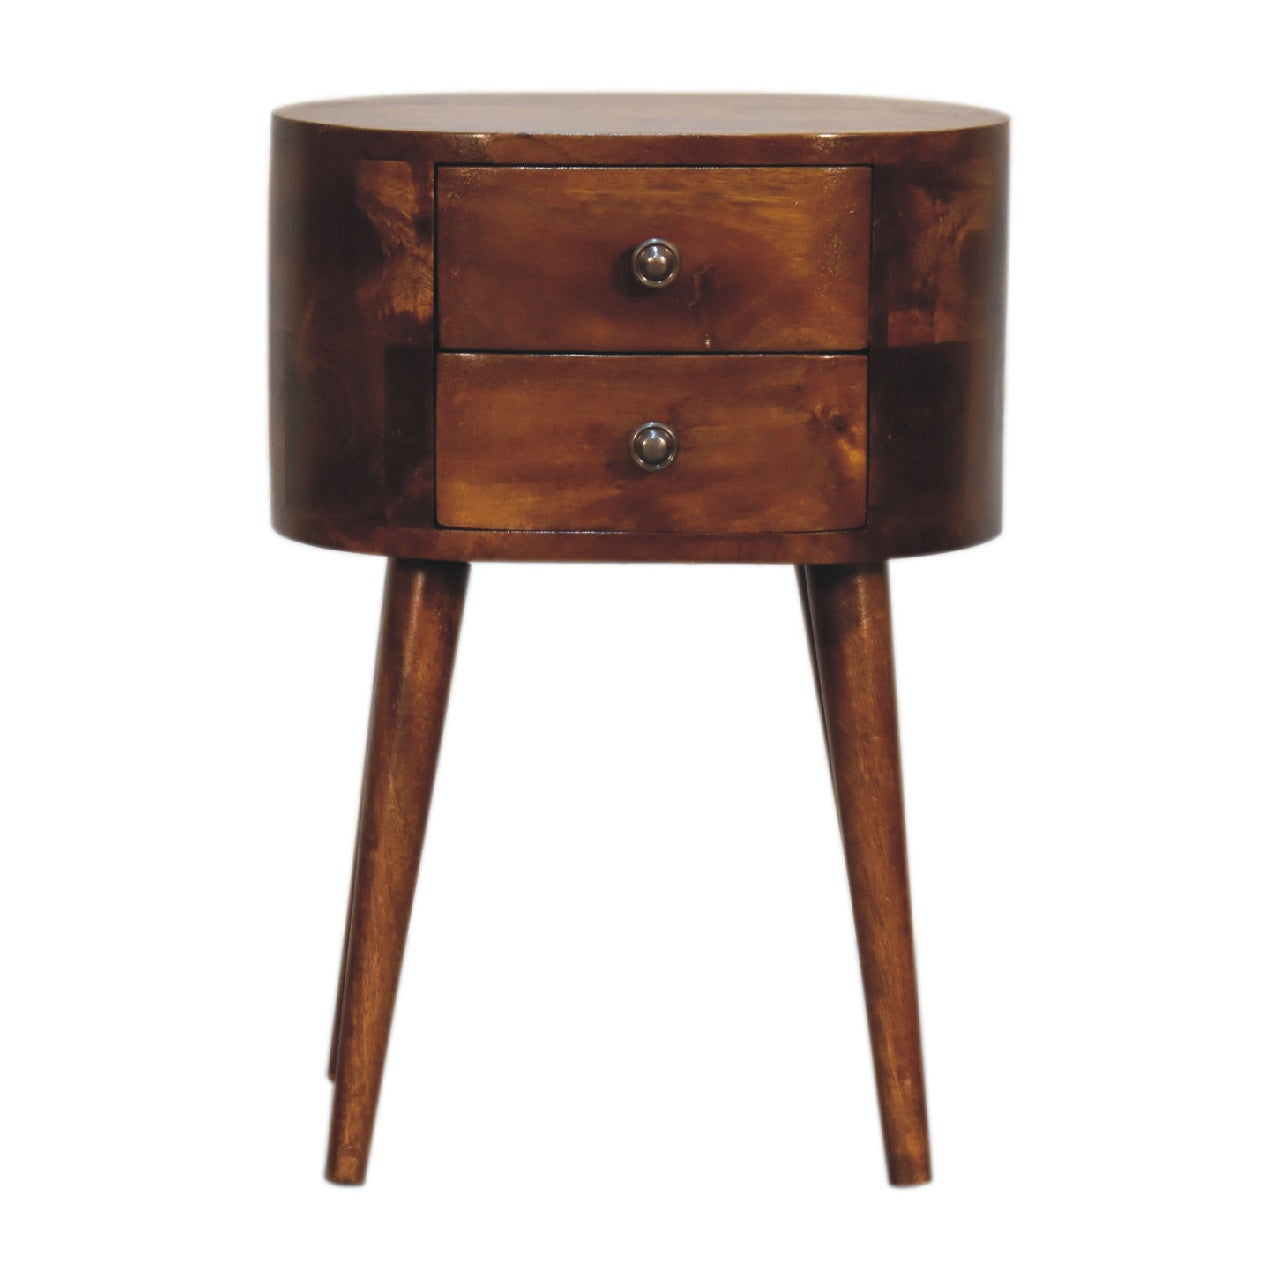 View Mini Chestnut Rounded Bedside Table information